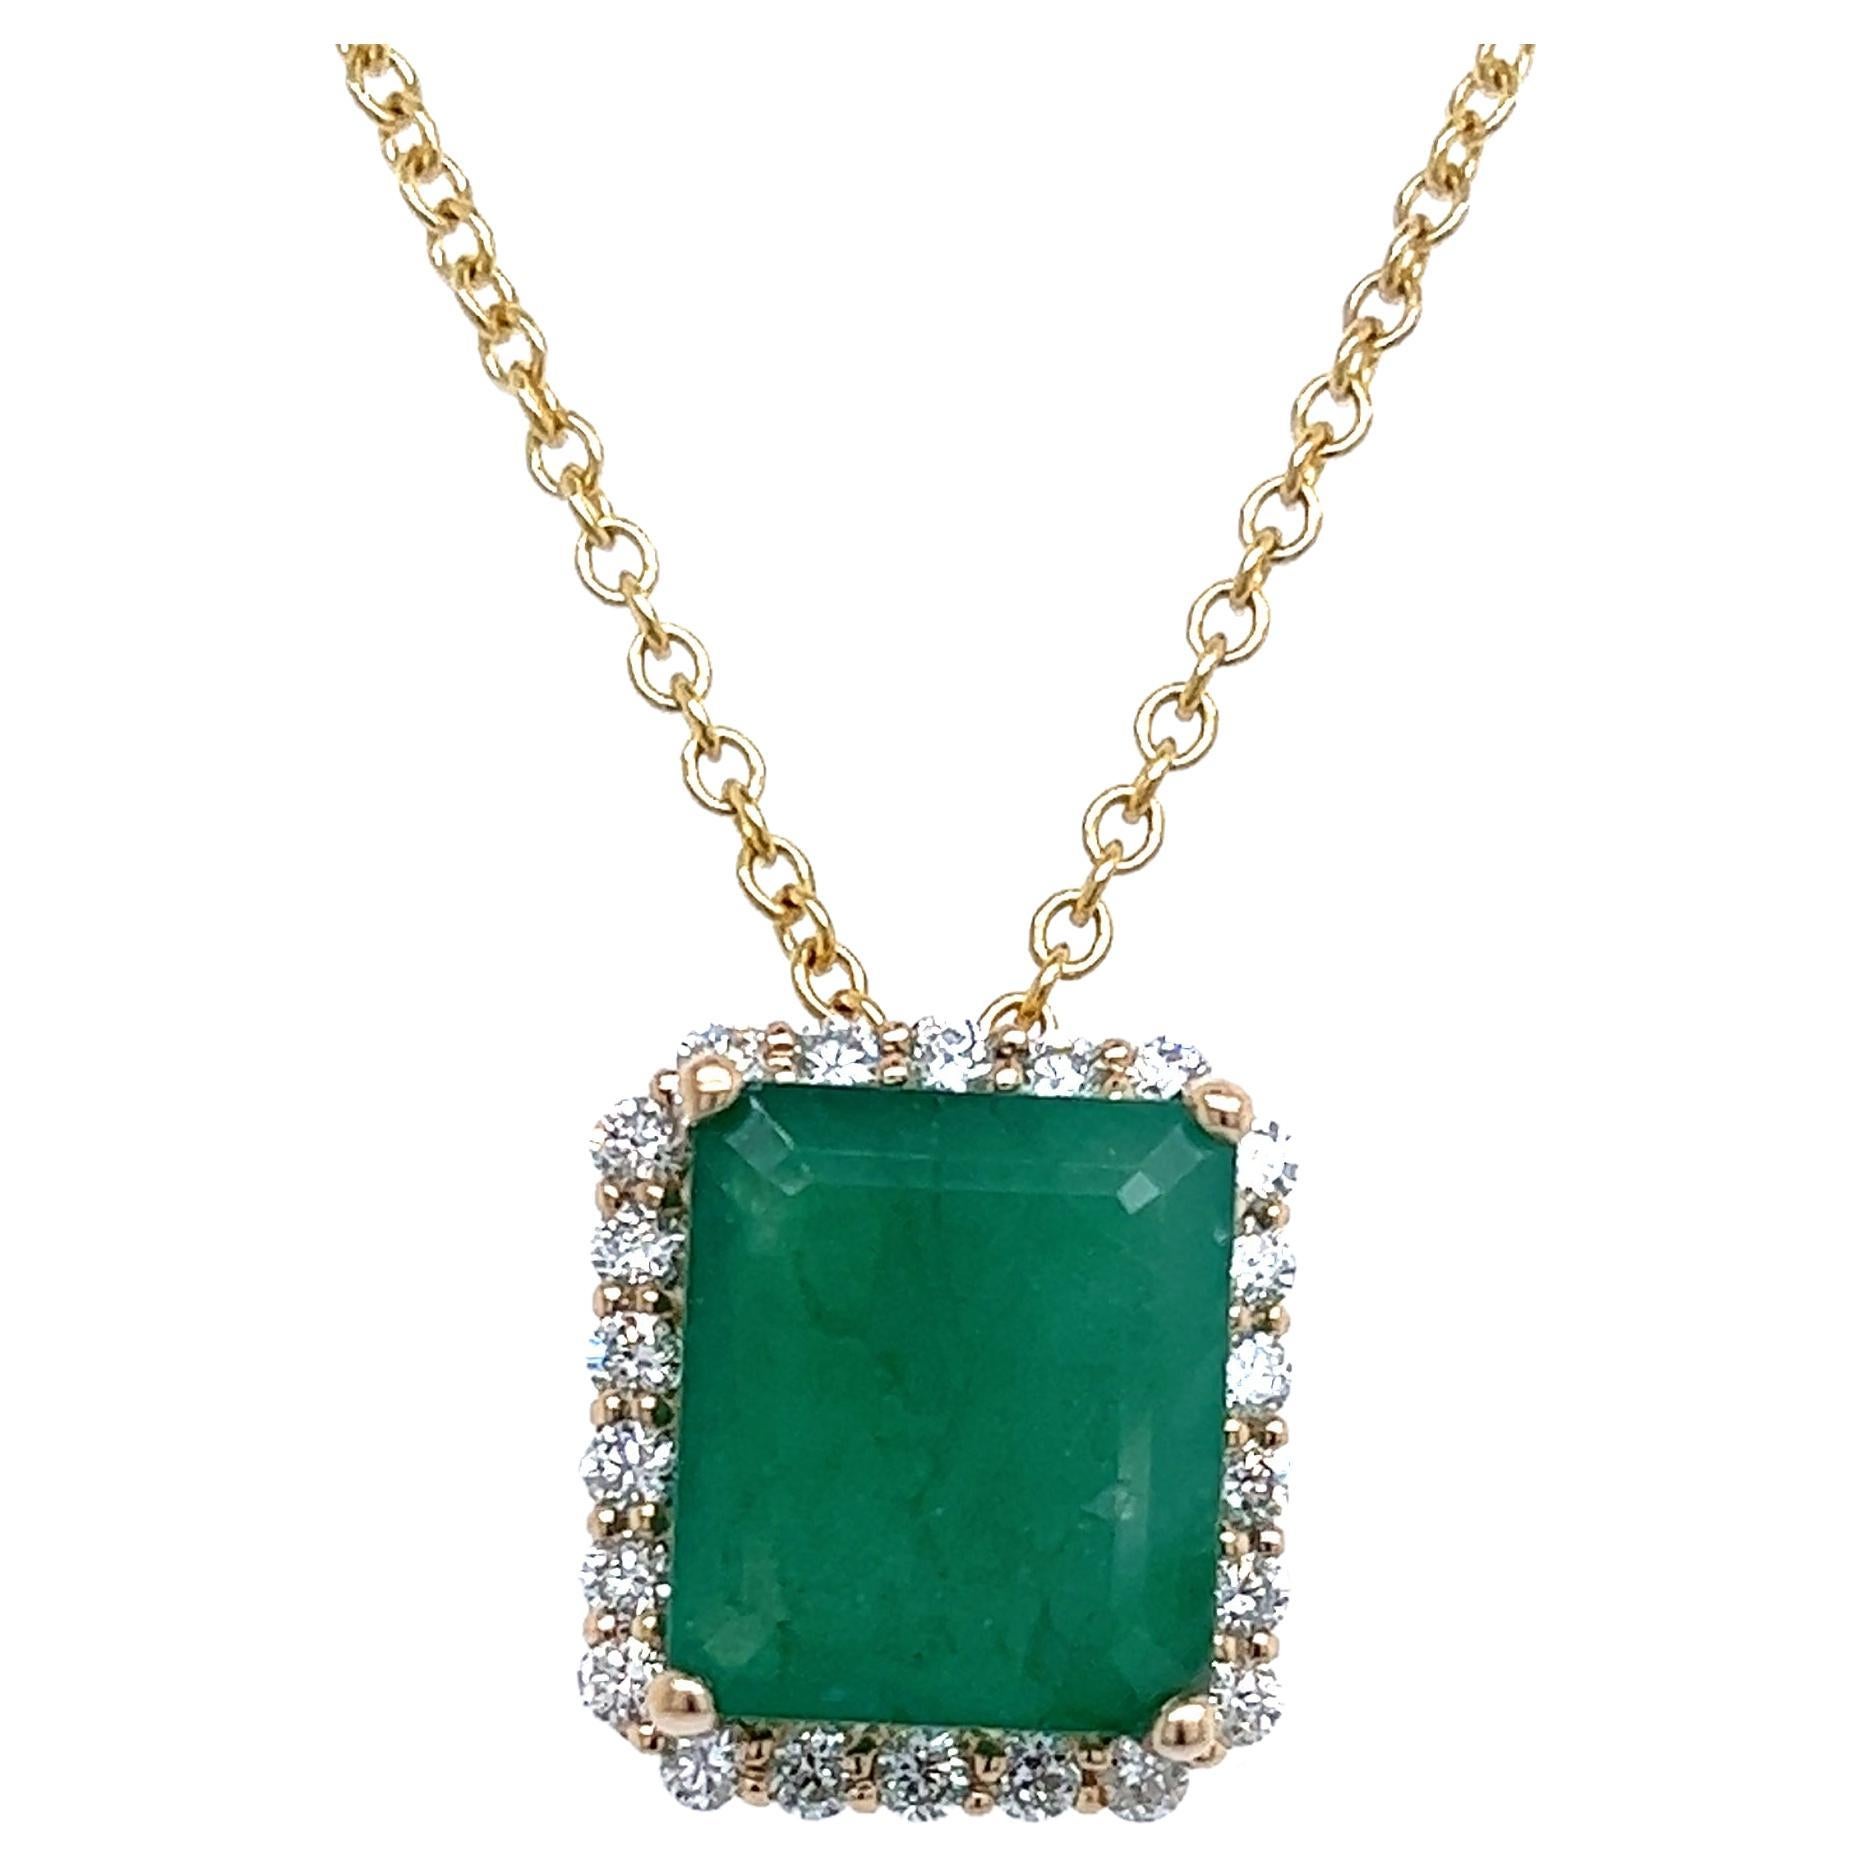 Natural Emerald Diamond Pendant Necklace 14k Yellow Gold 5.05 TCW Certified For Sale